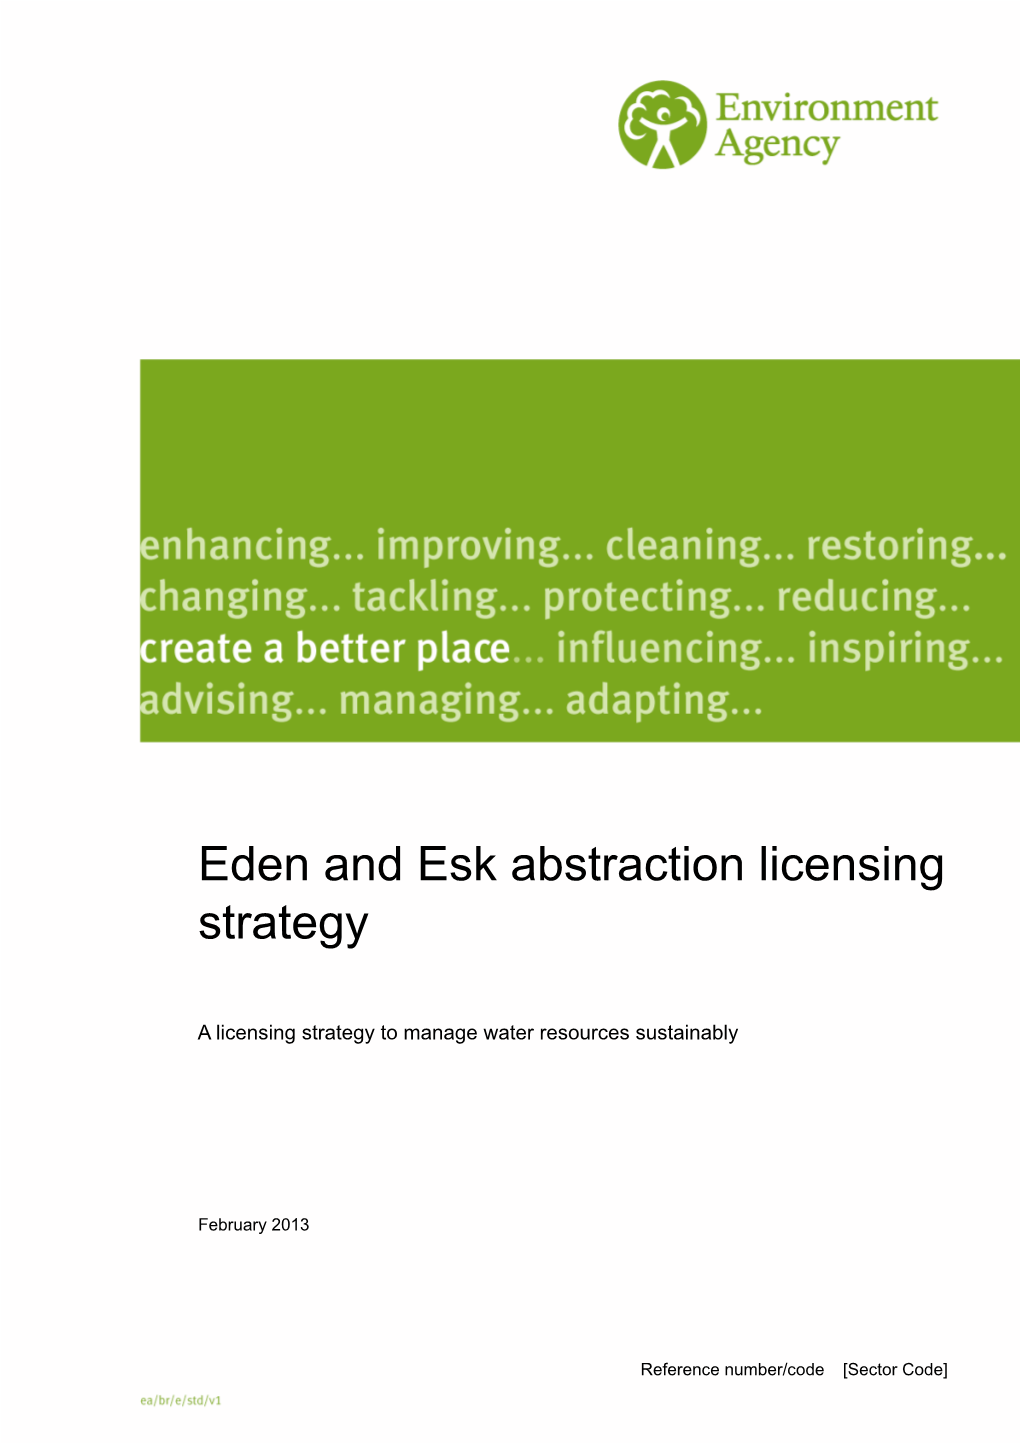 Eden and Esk Abstraction Licensing Strategy